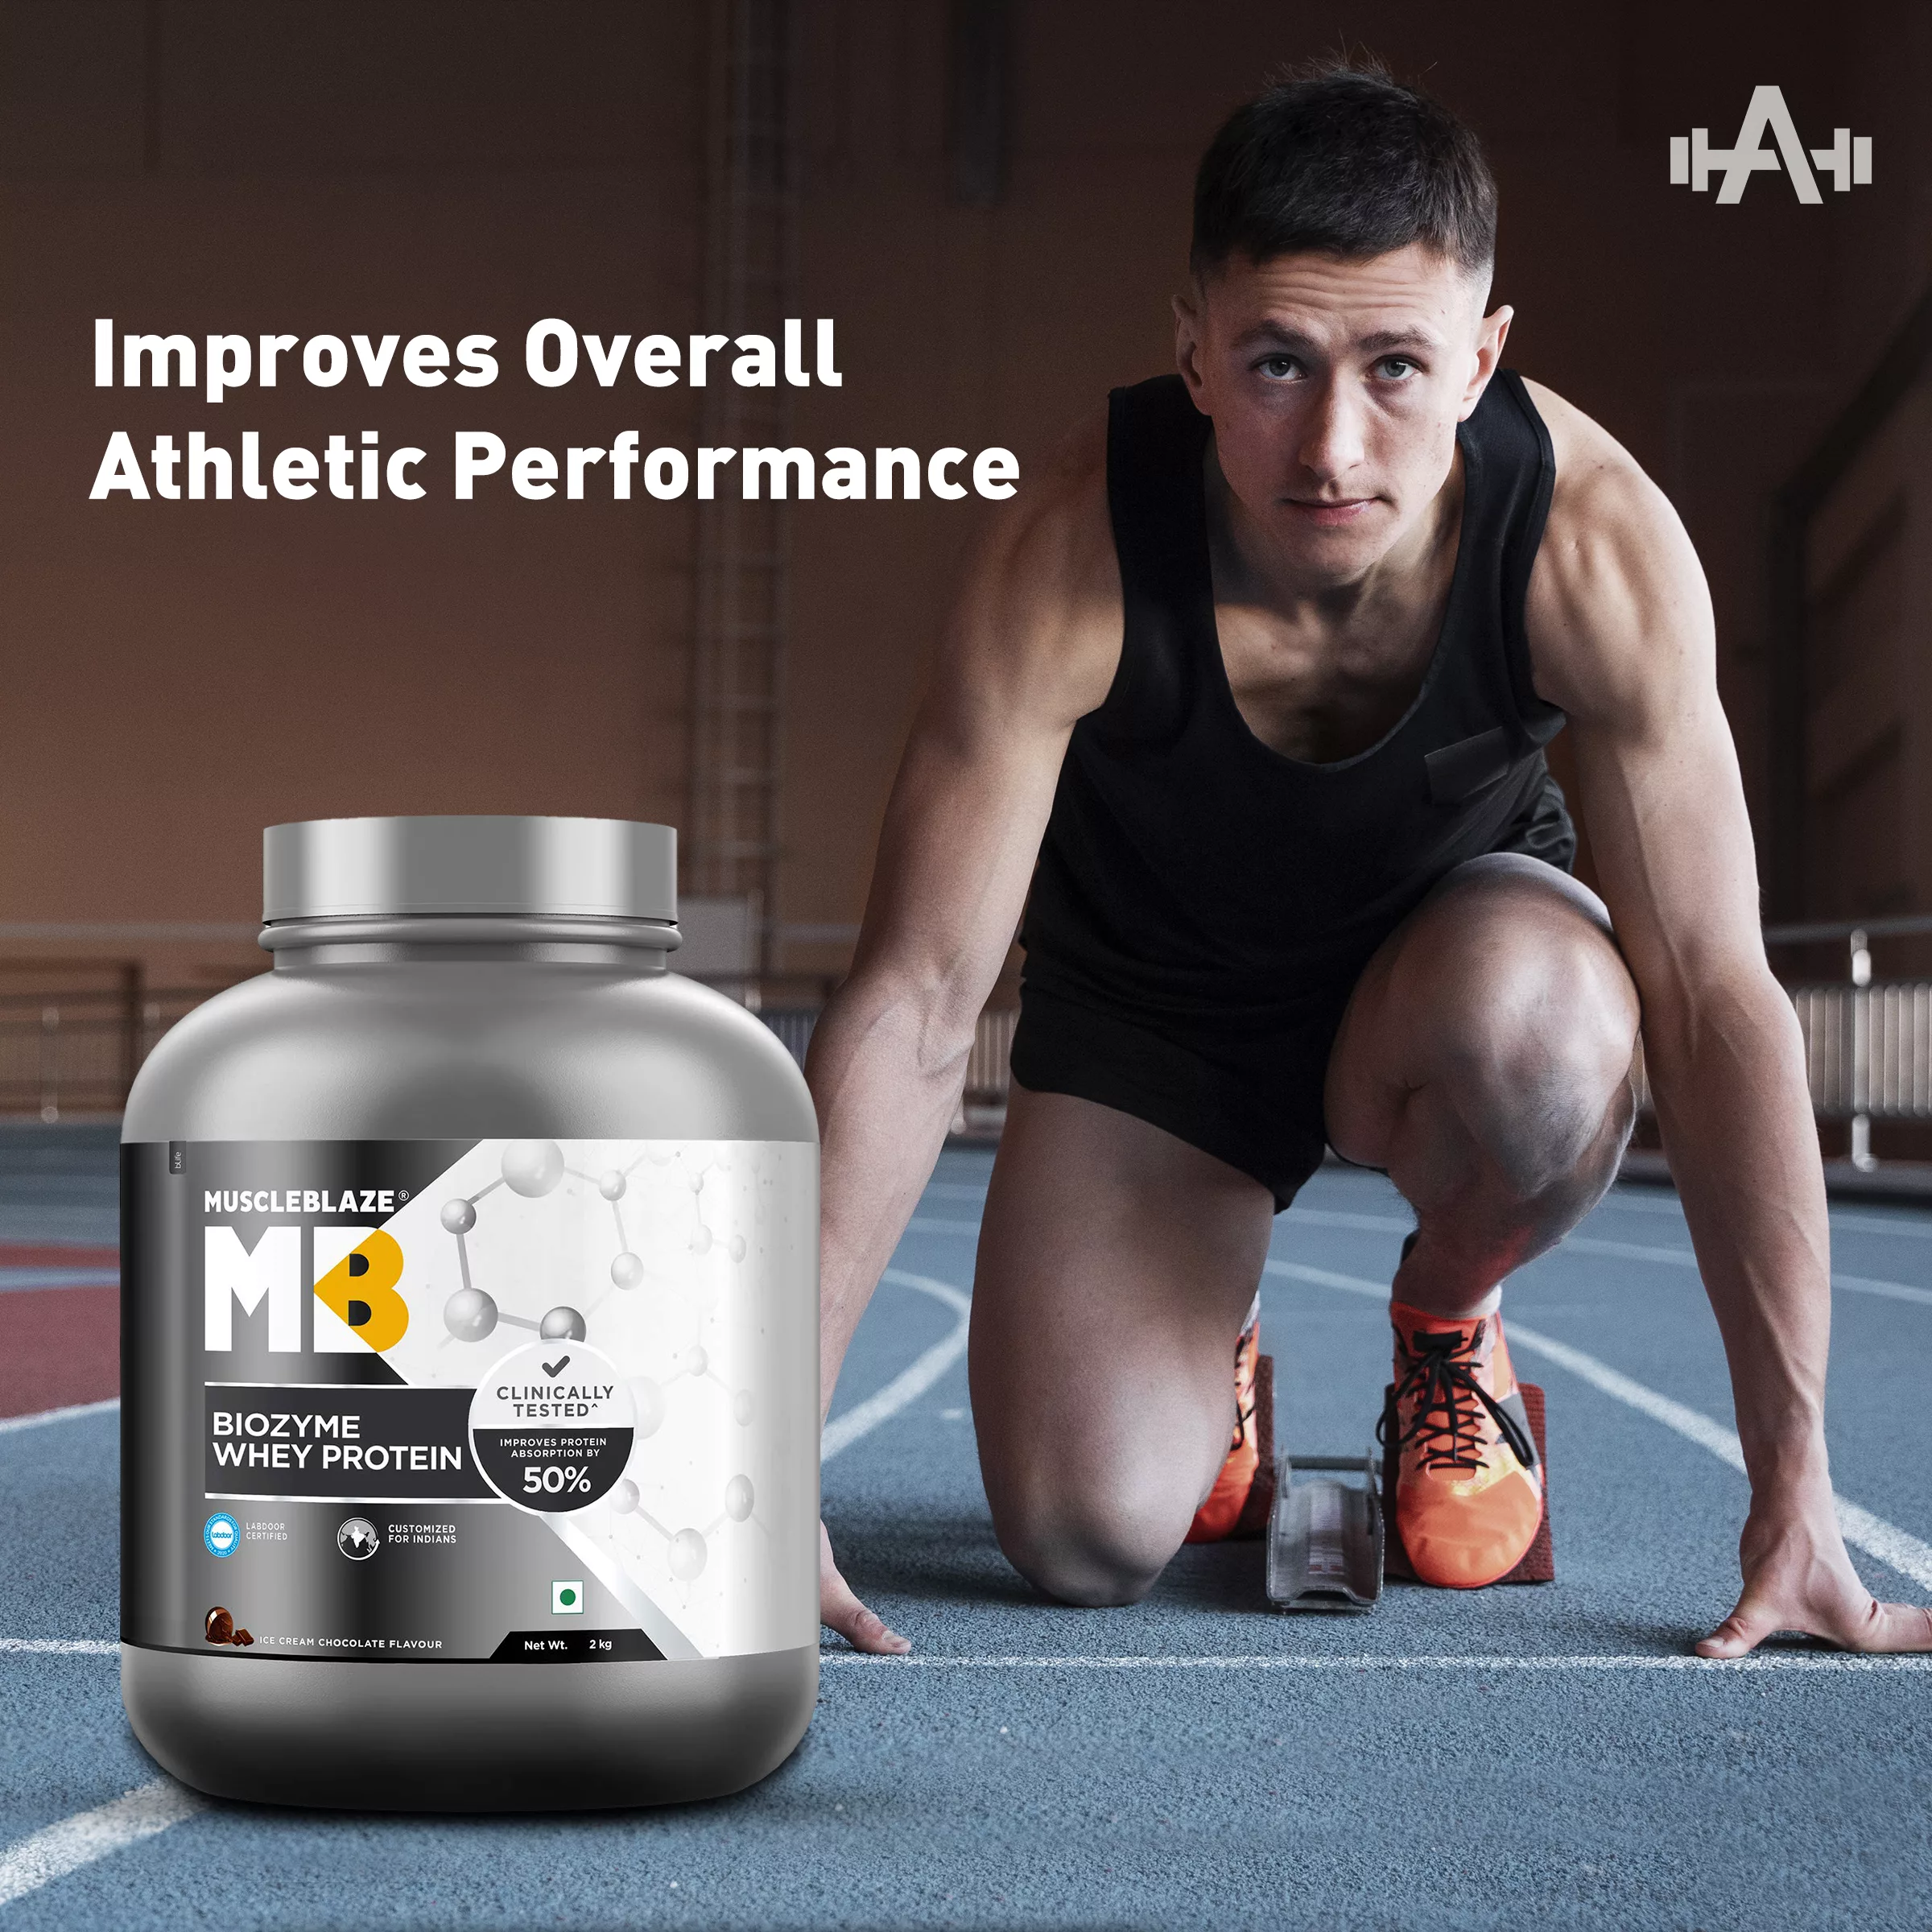 Improves Overall Athletic Performance